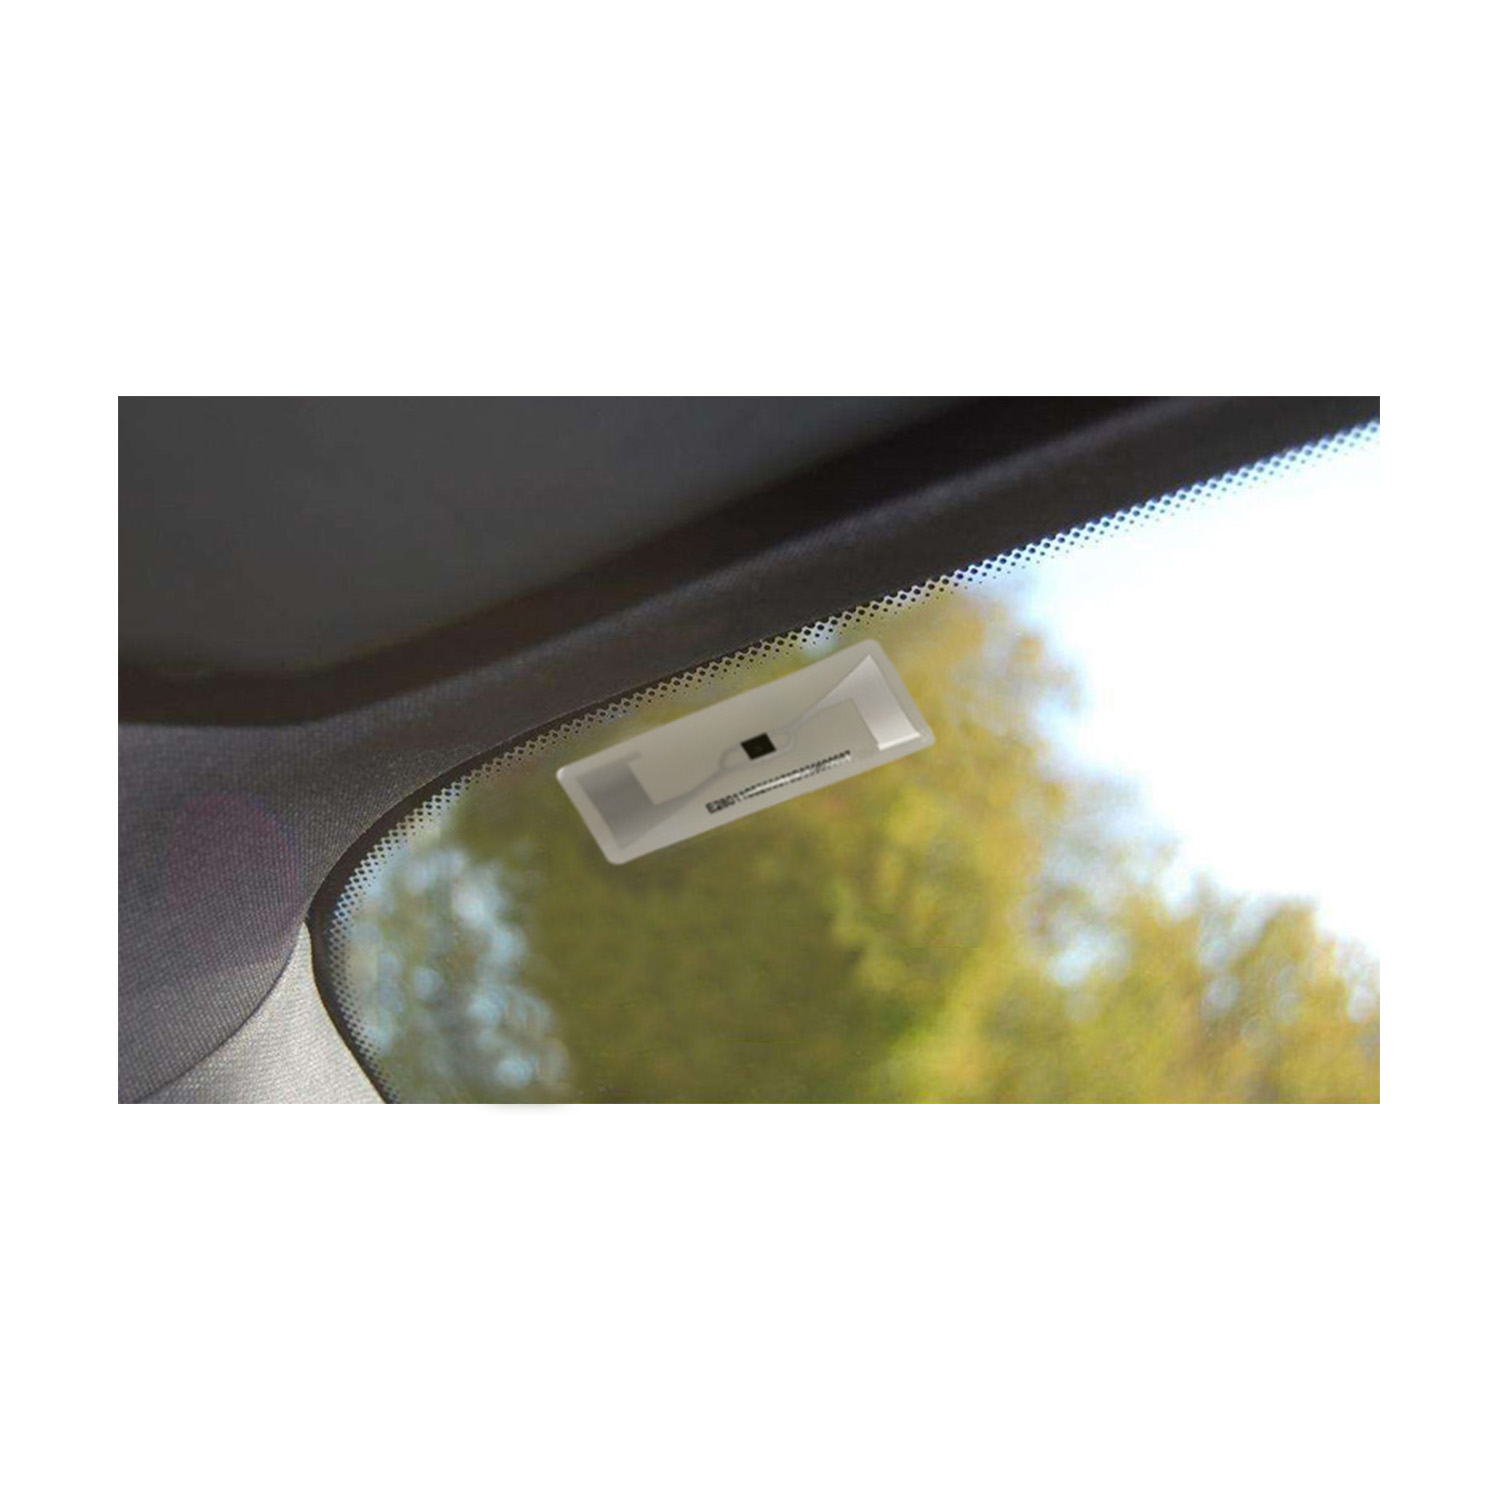 RFID Tag Sticker for Vehicle Windshield CL7203L8